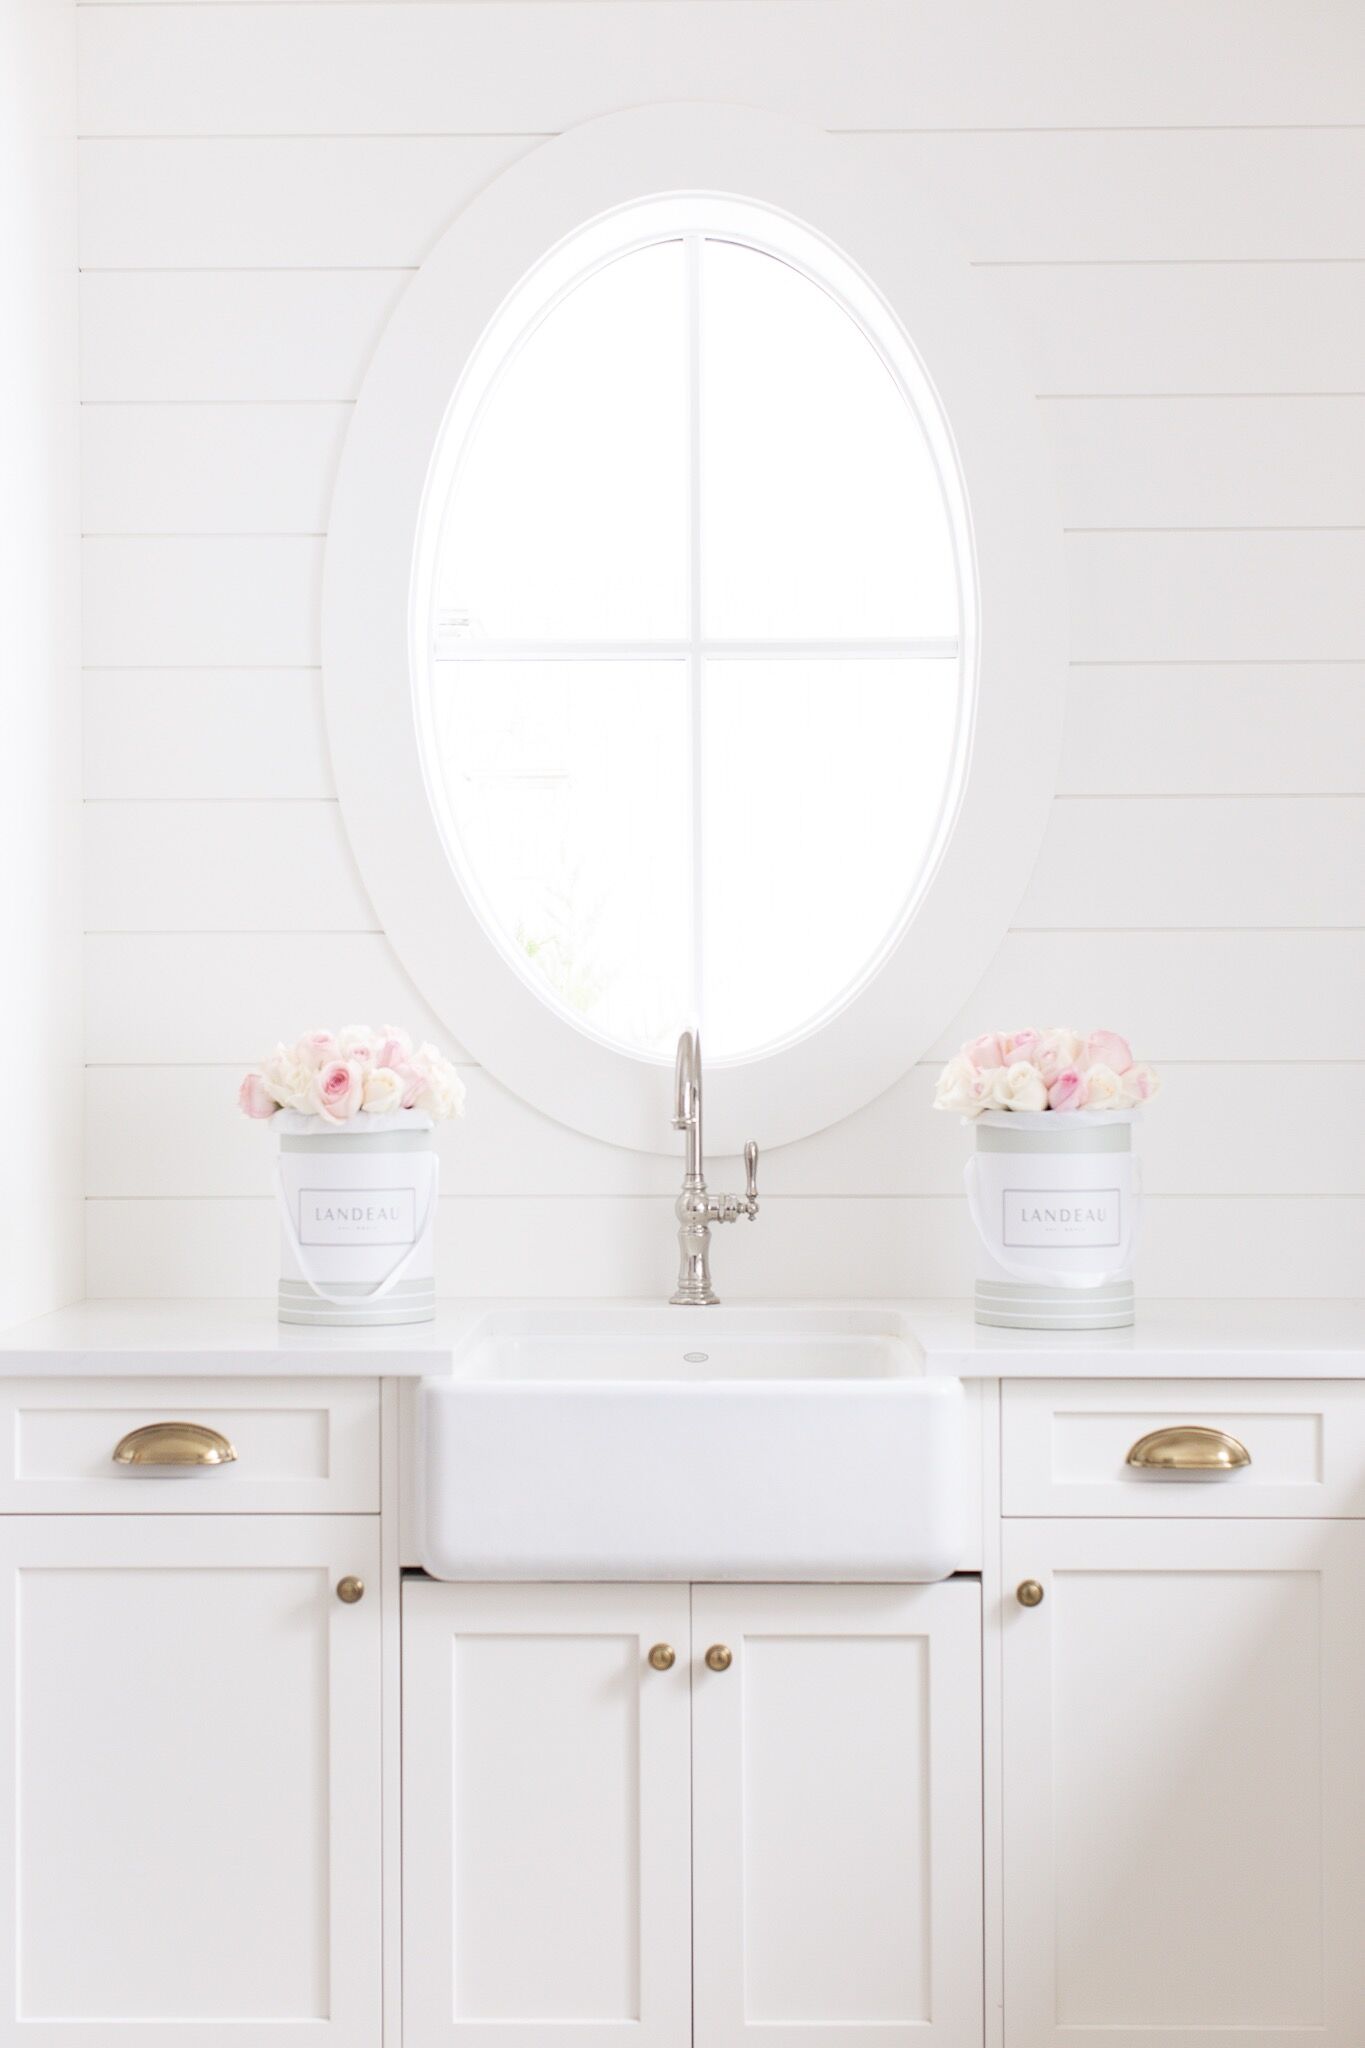 White shiplap laundry room with polished nickel faucet, farmhouse sink, oval window and brass hardware with buckets of pink roses! Give Landeau flower Valentine's giveaway on the Fraiche Nutrition blog